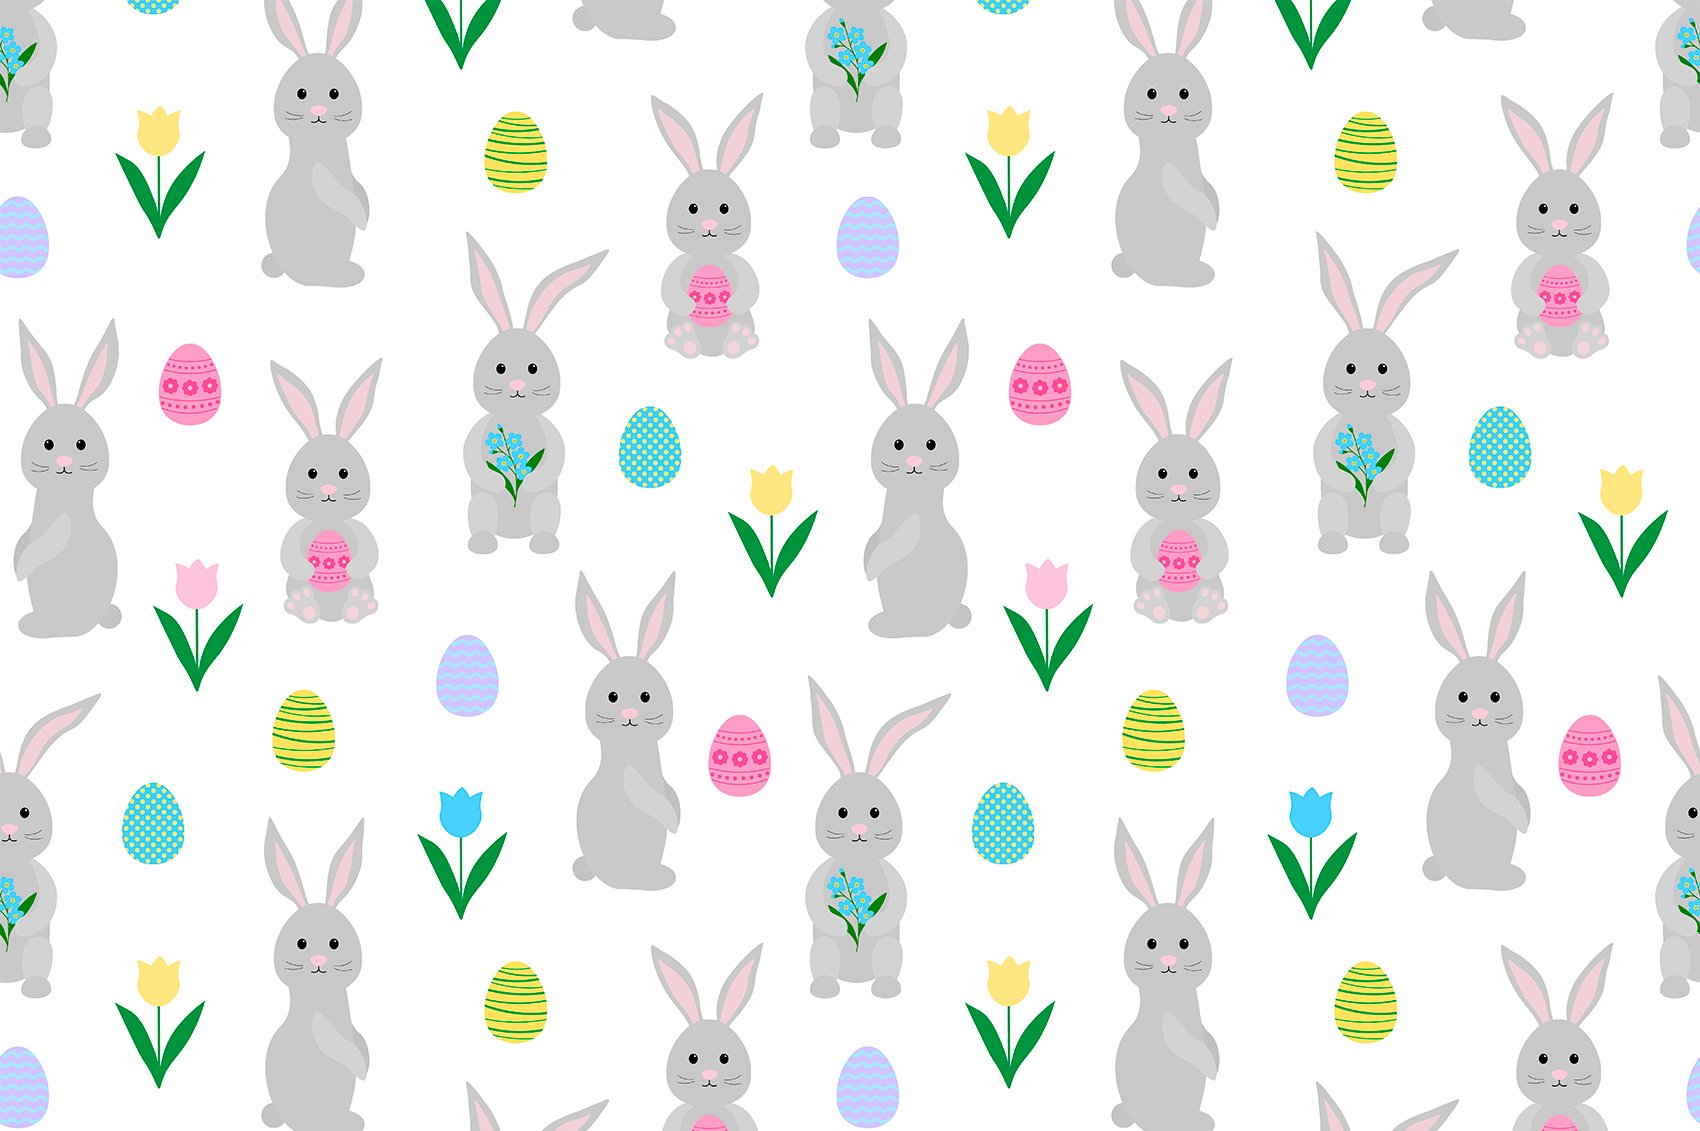 This collection of 8 seamless patterns is perfect for your creative project.